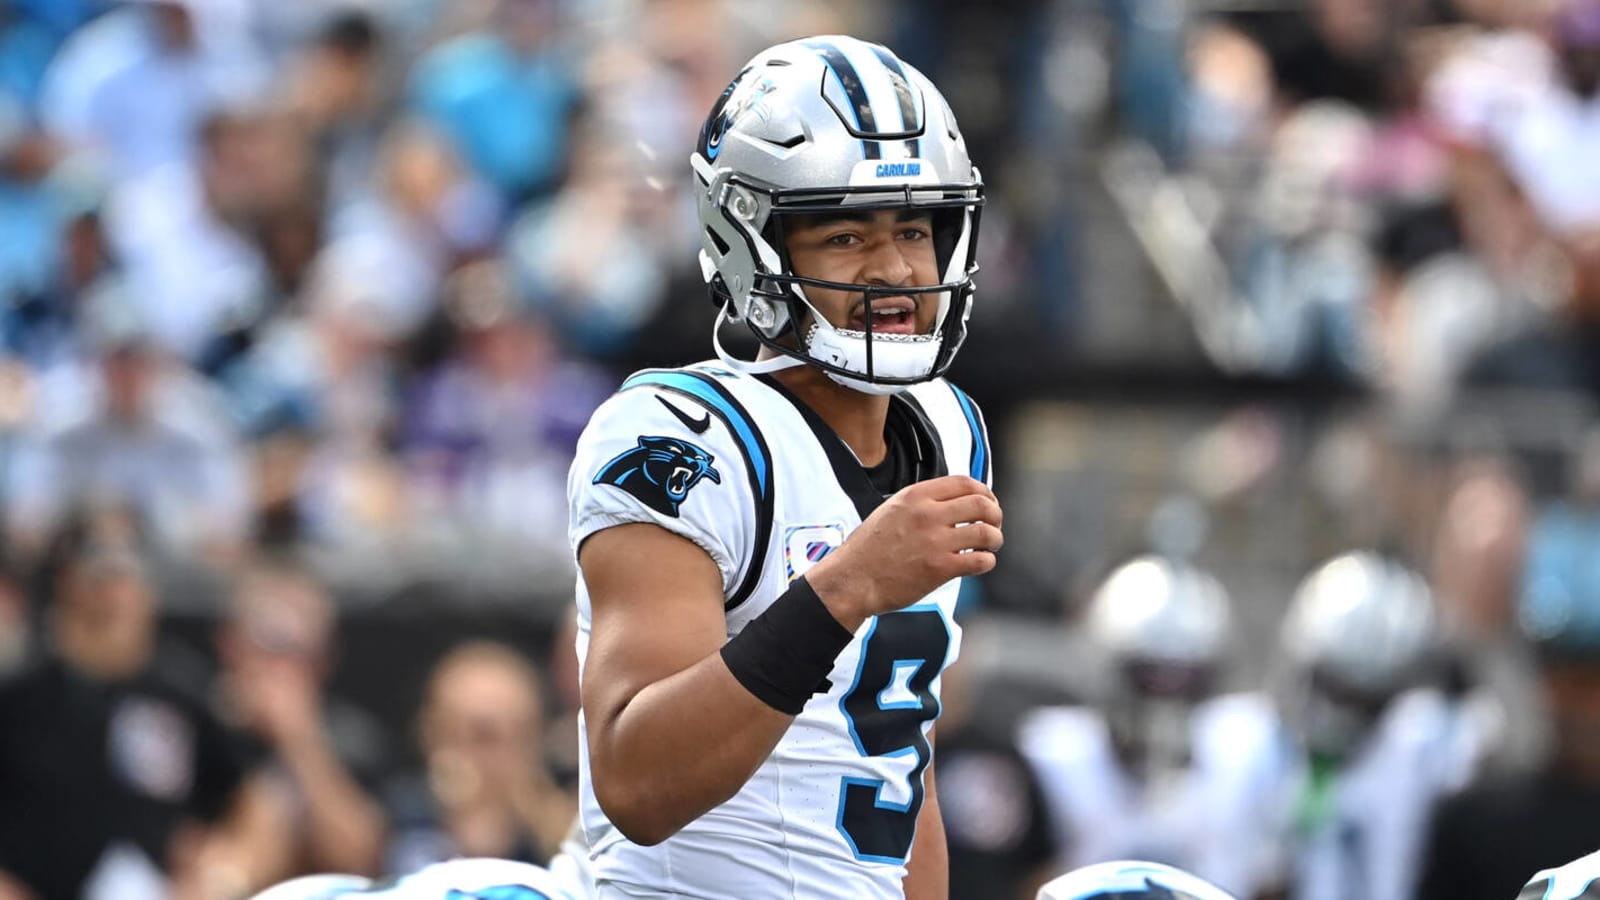 Offensive tweaks might help, but Panthers still need WR